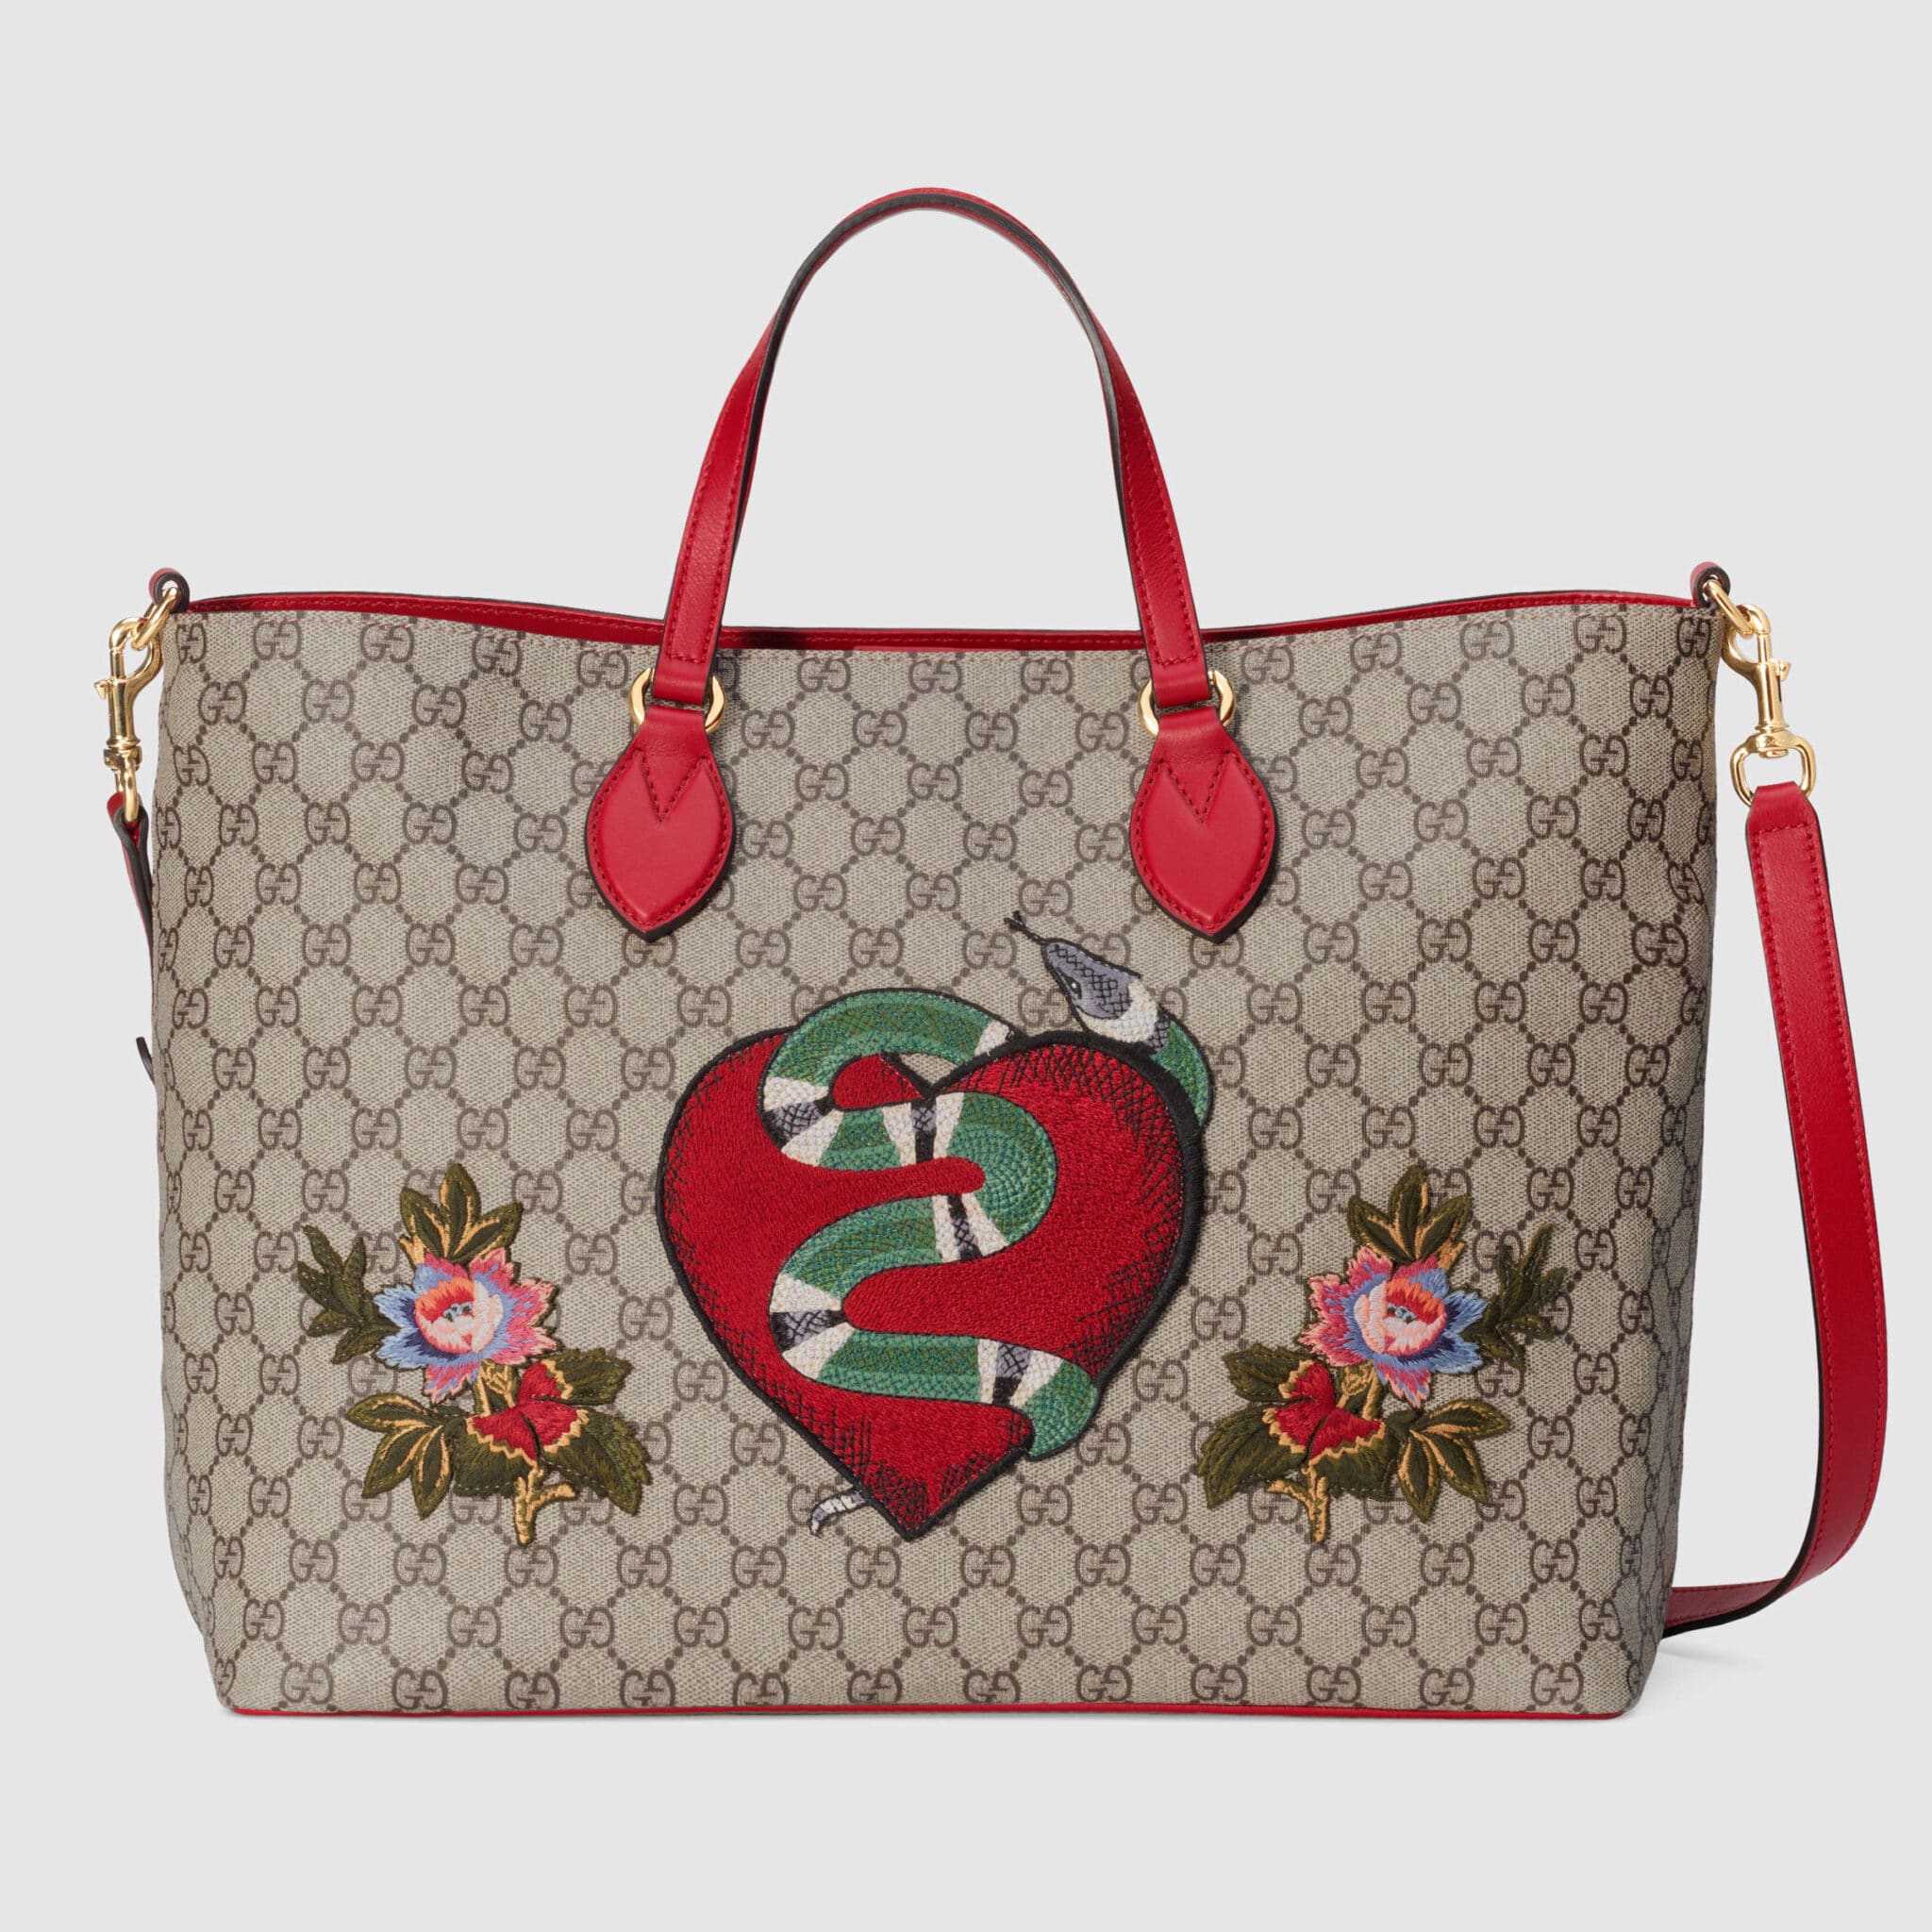 Gucci Gift Guide 2016 – Spotted Fashion